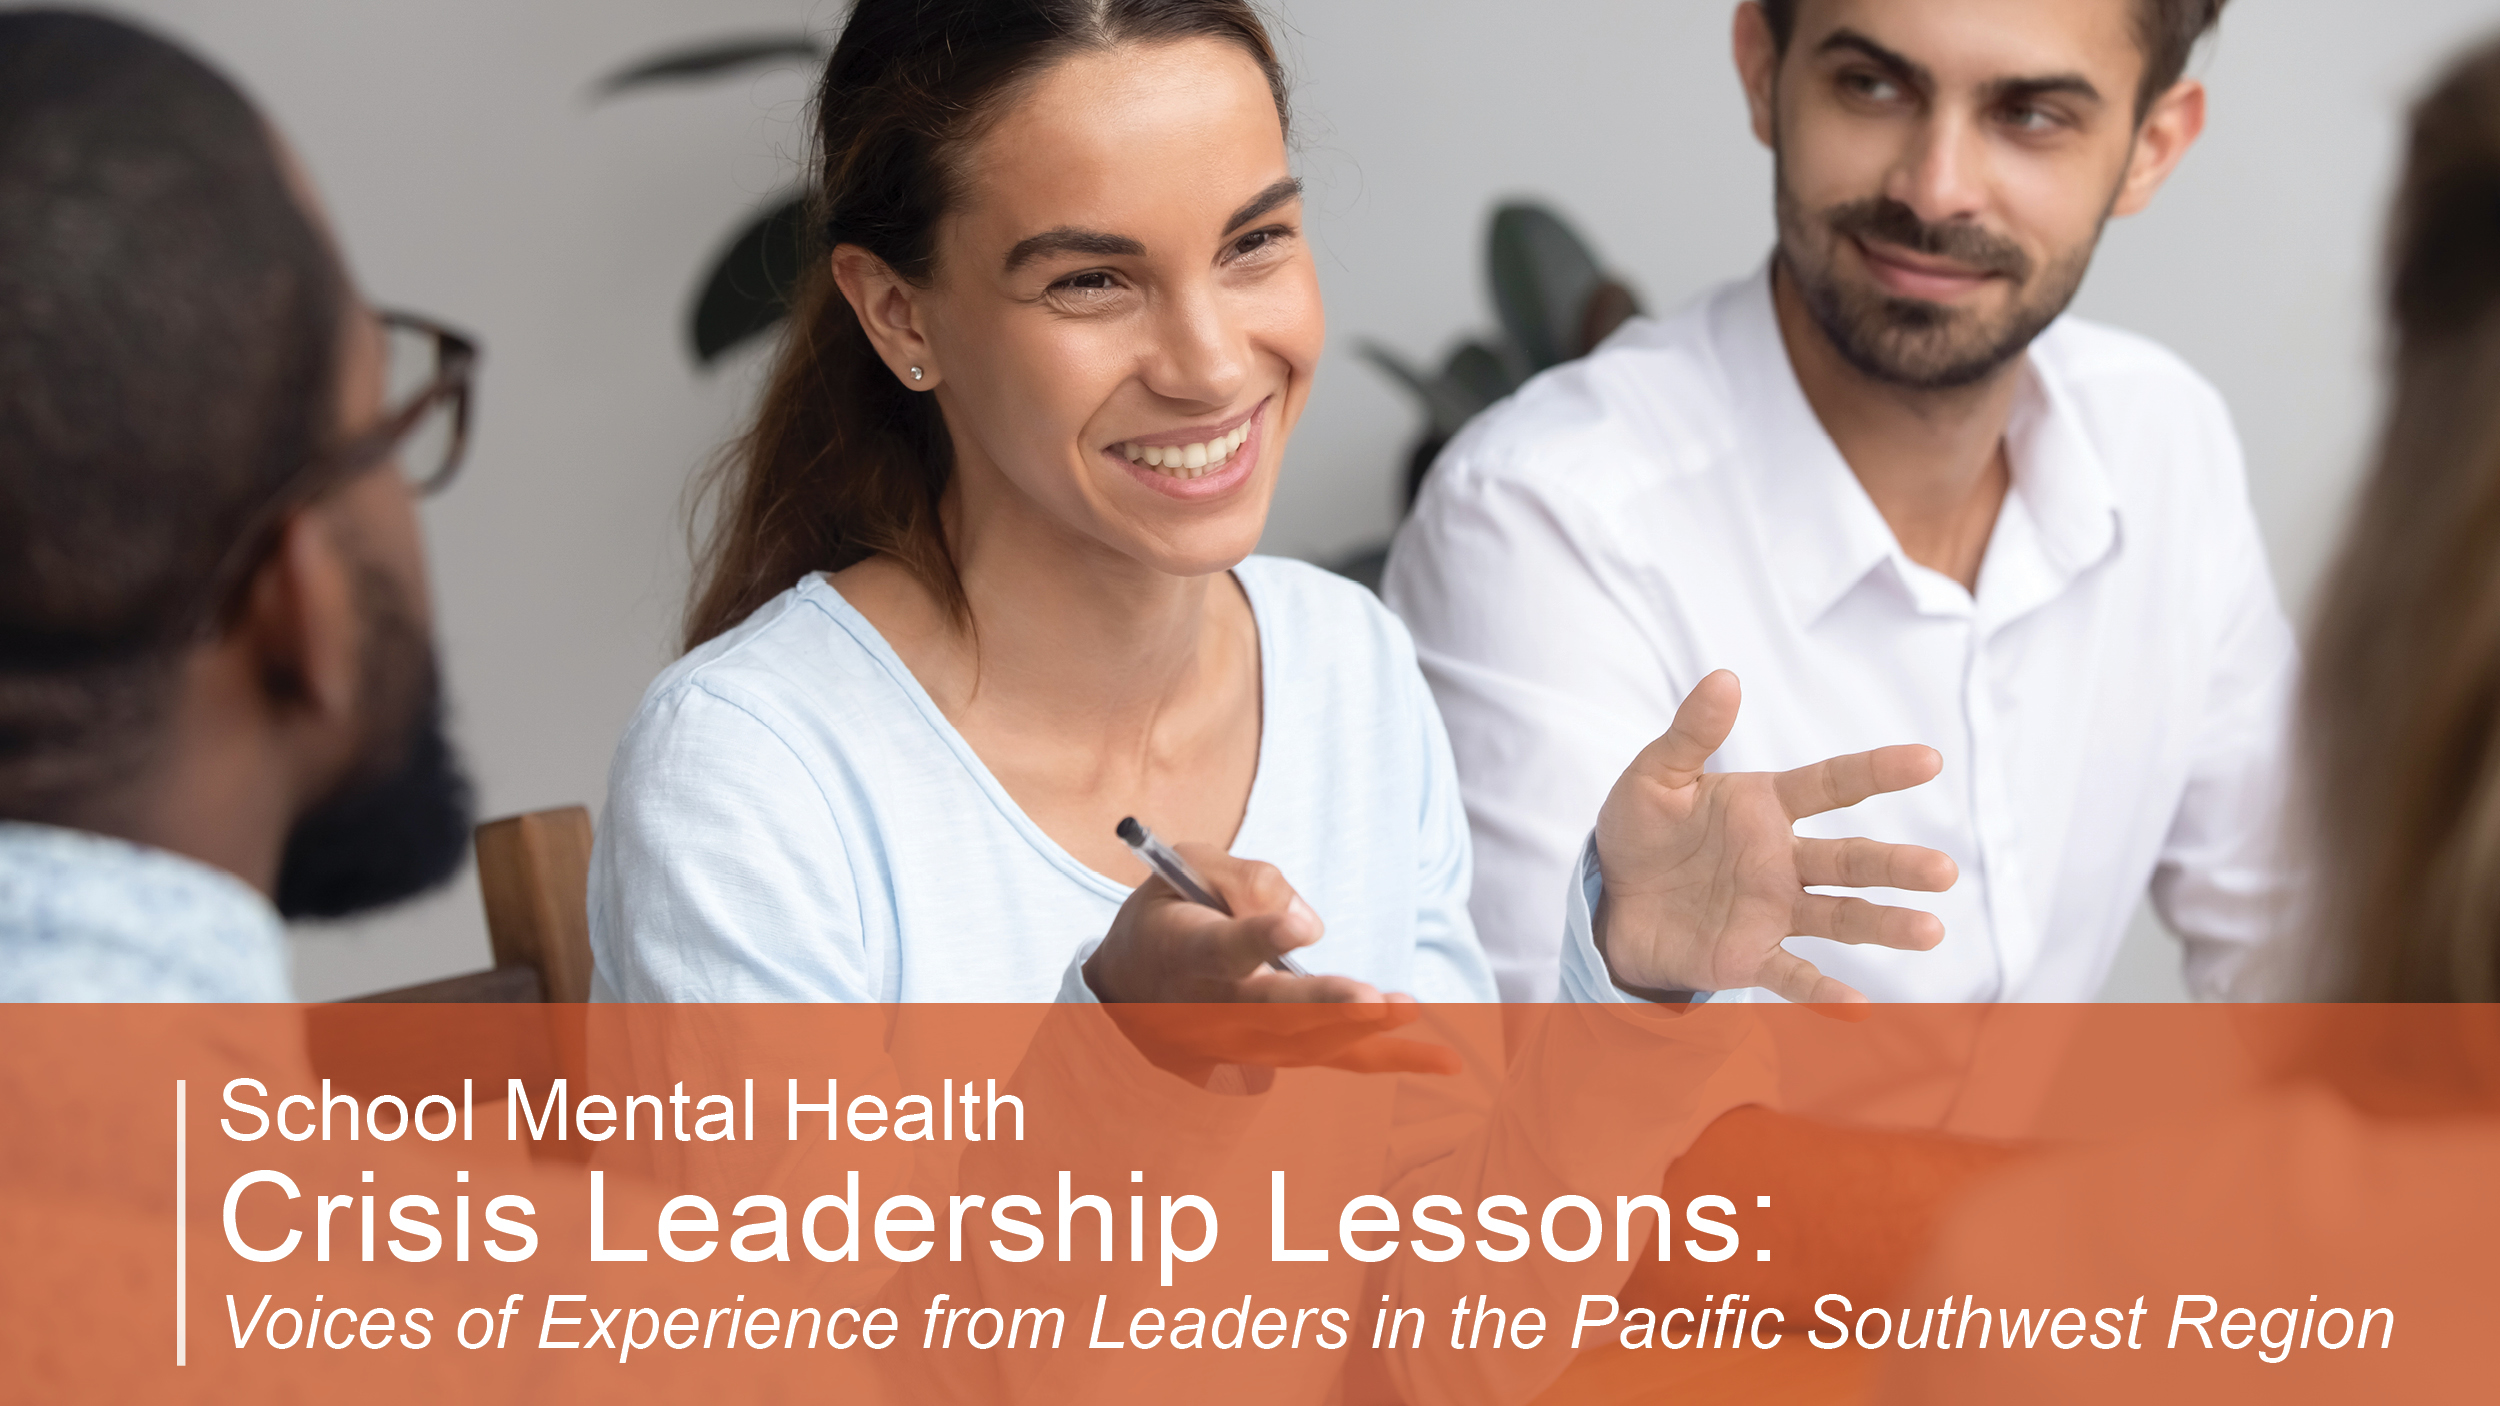 School Mental Health Crisis Leadership Lessons: Voices of Experience from Leaders in the Pacific Southwest Region